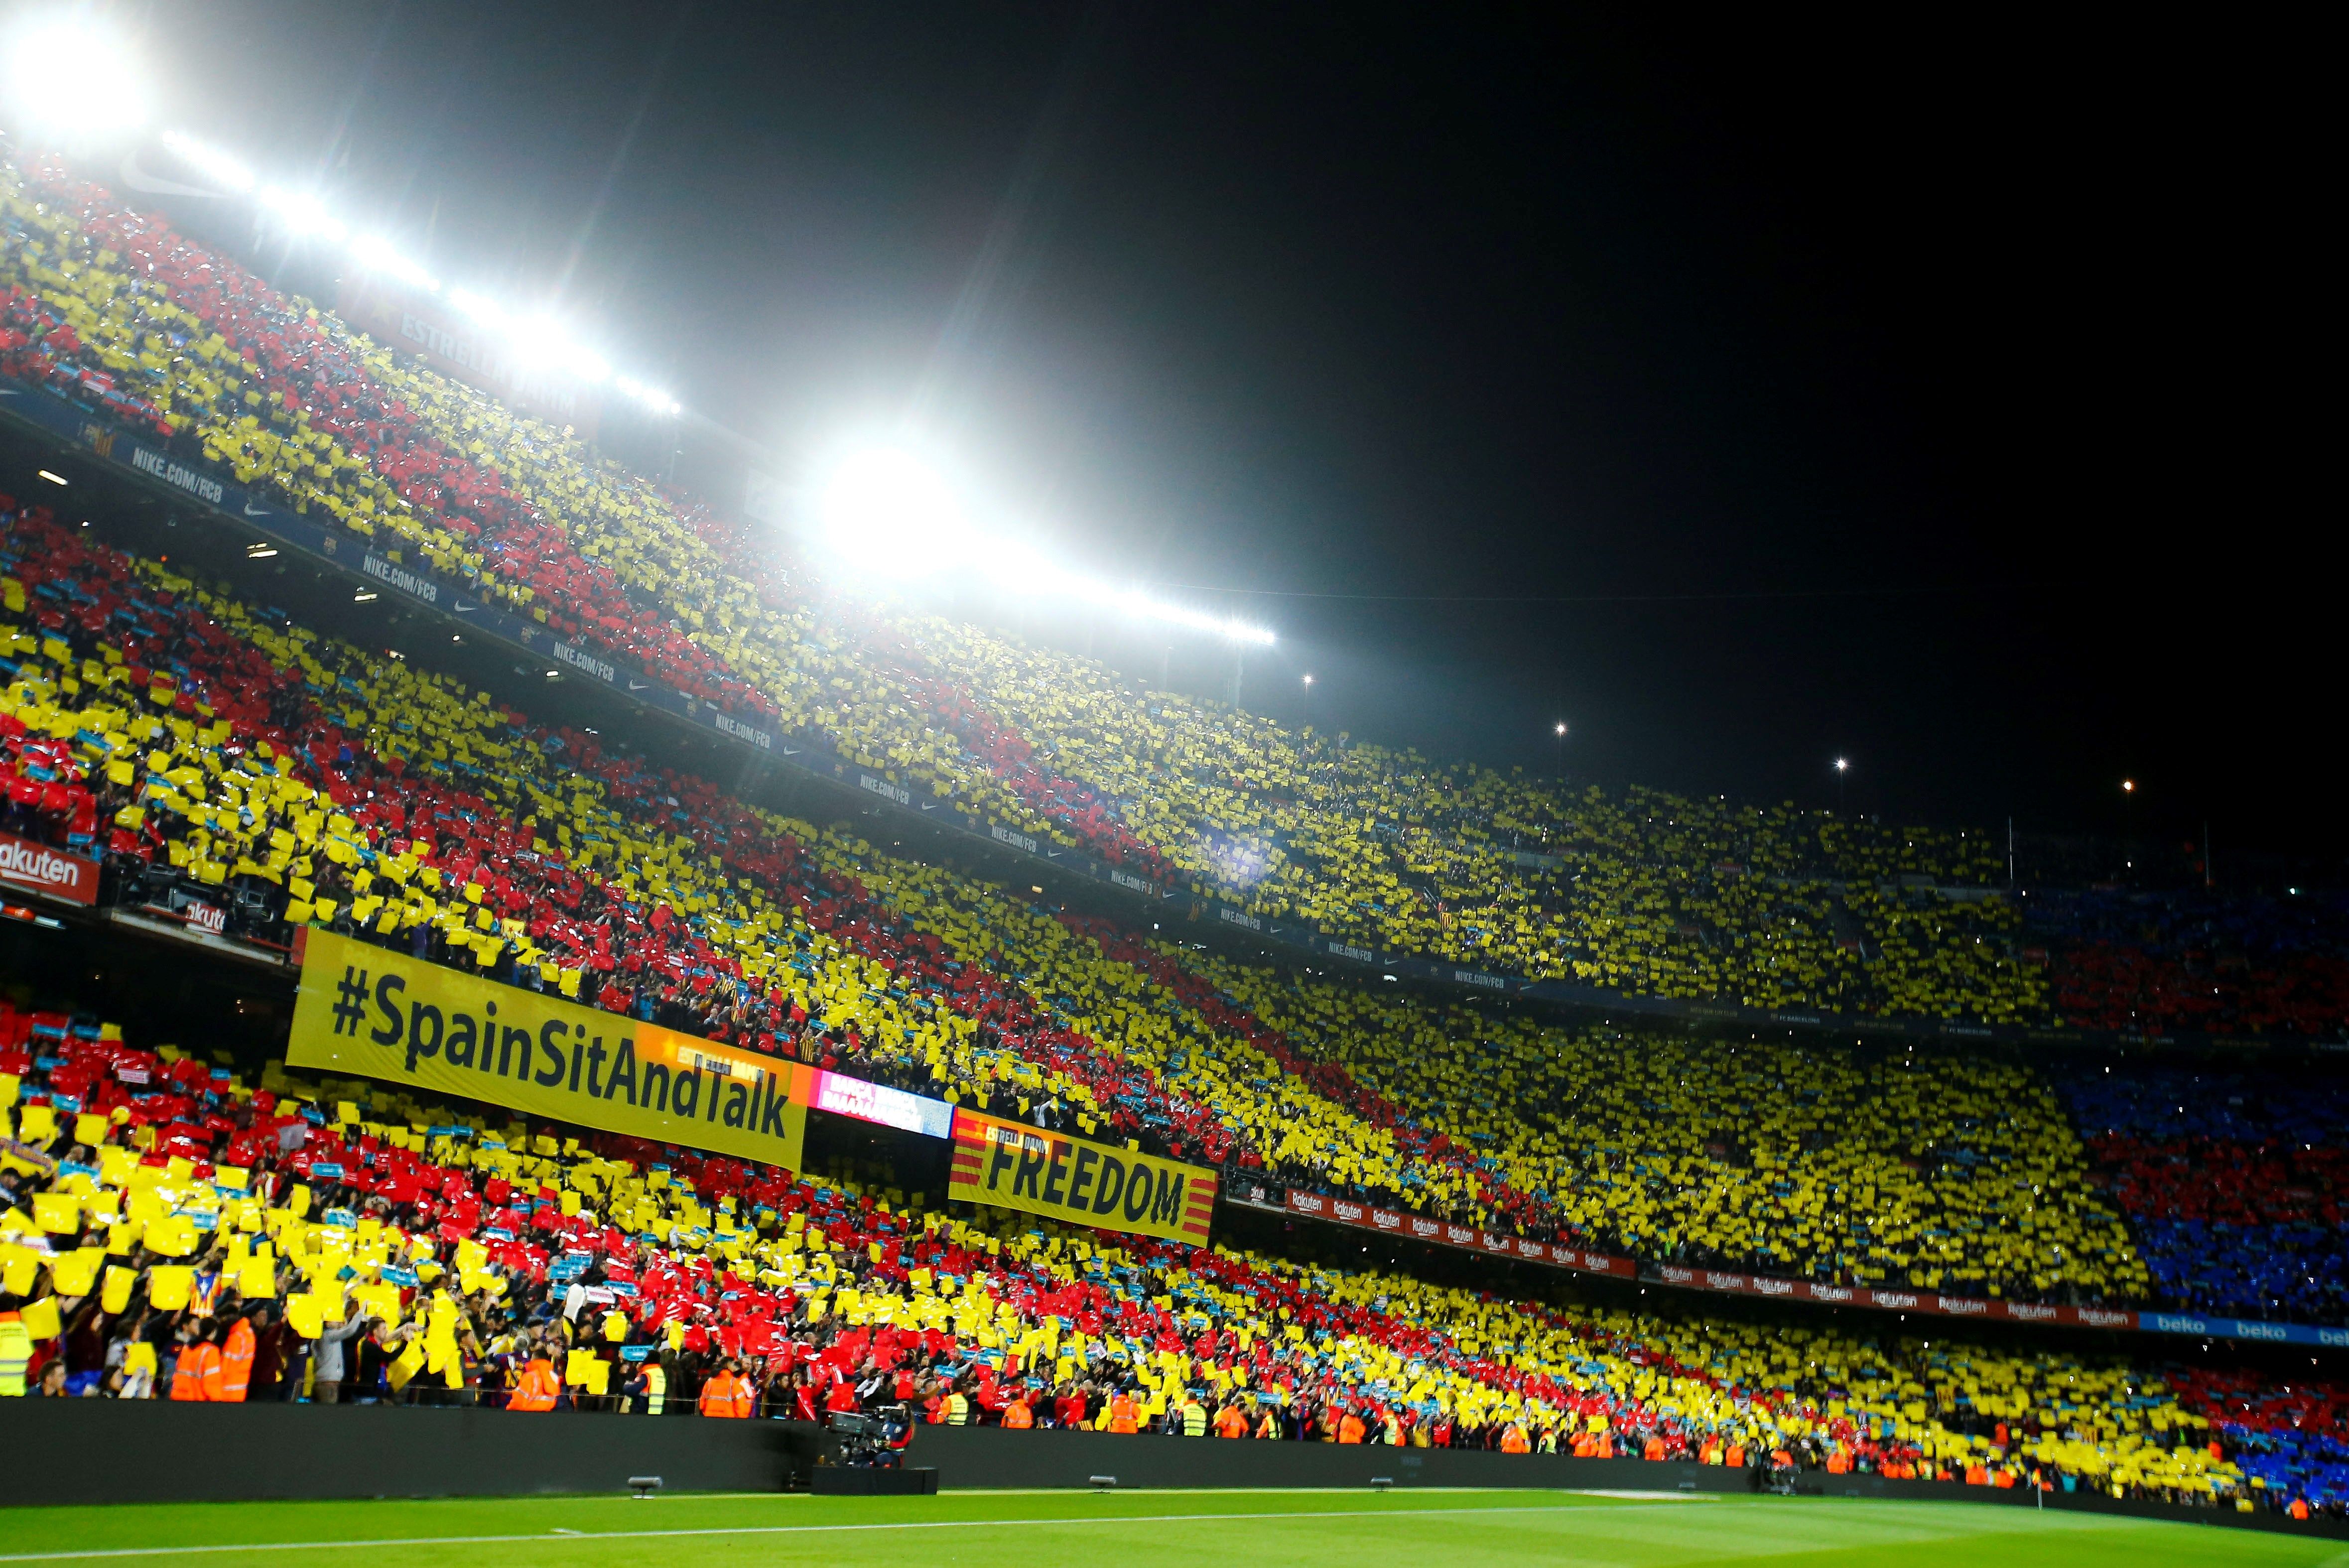 Catalan protesters make themselves heard during El Clásico: "Spain, sit and talk"